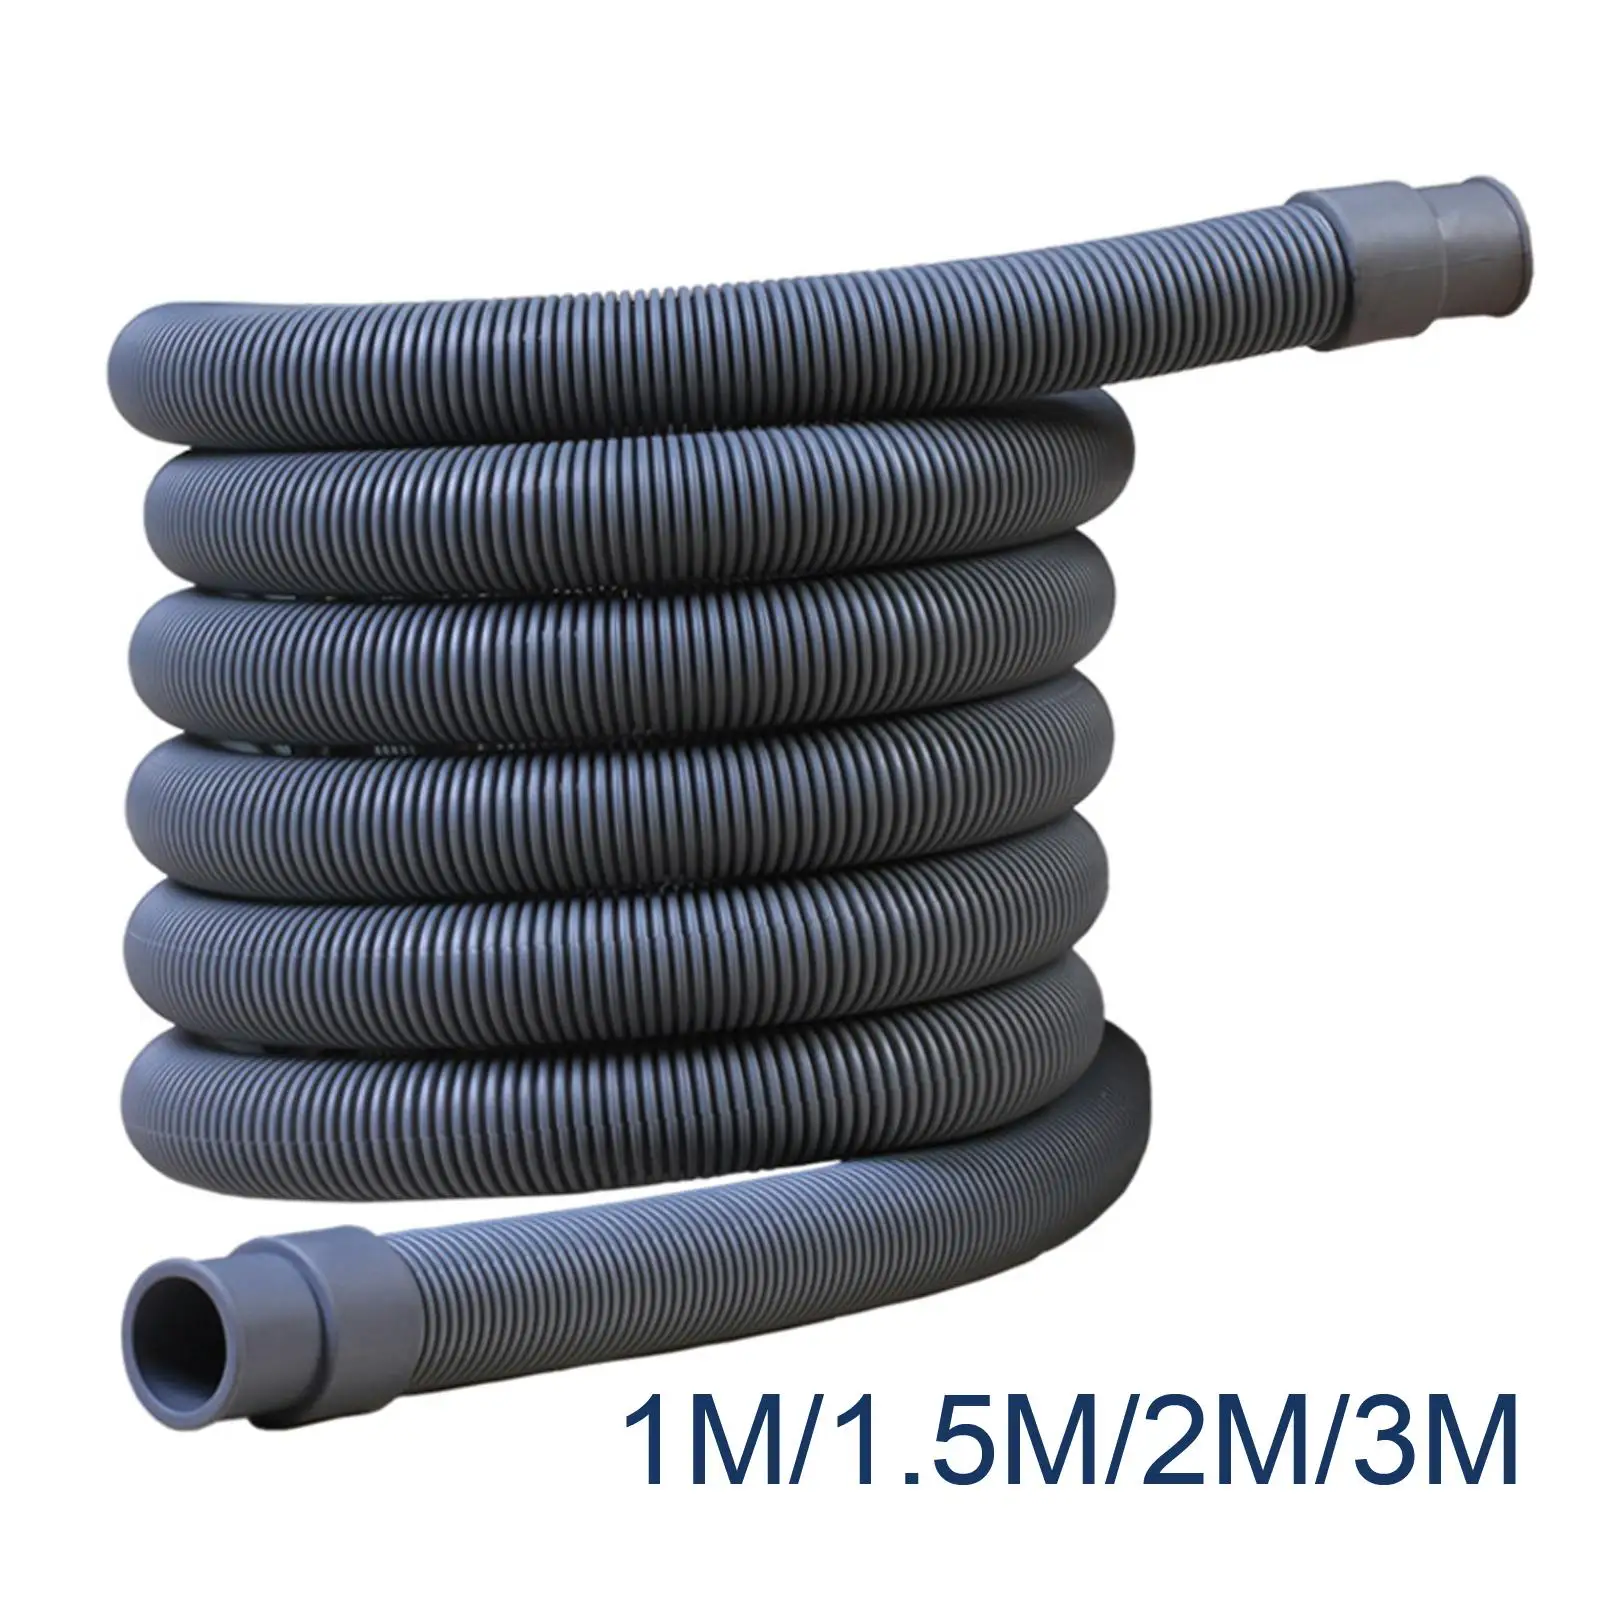 Washing Machine Drain Waste Hose Flexible Hose Washer Drain Hose Discharge Hose Extension Pipes for Outdoor Indoor Garden